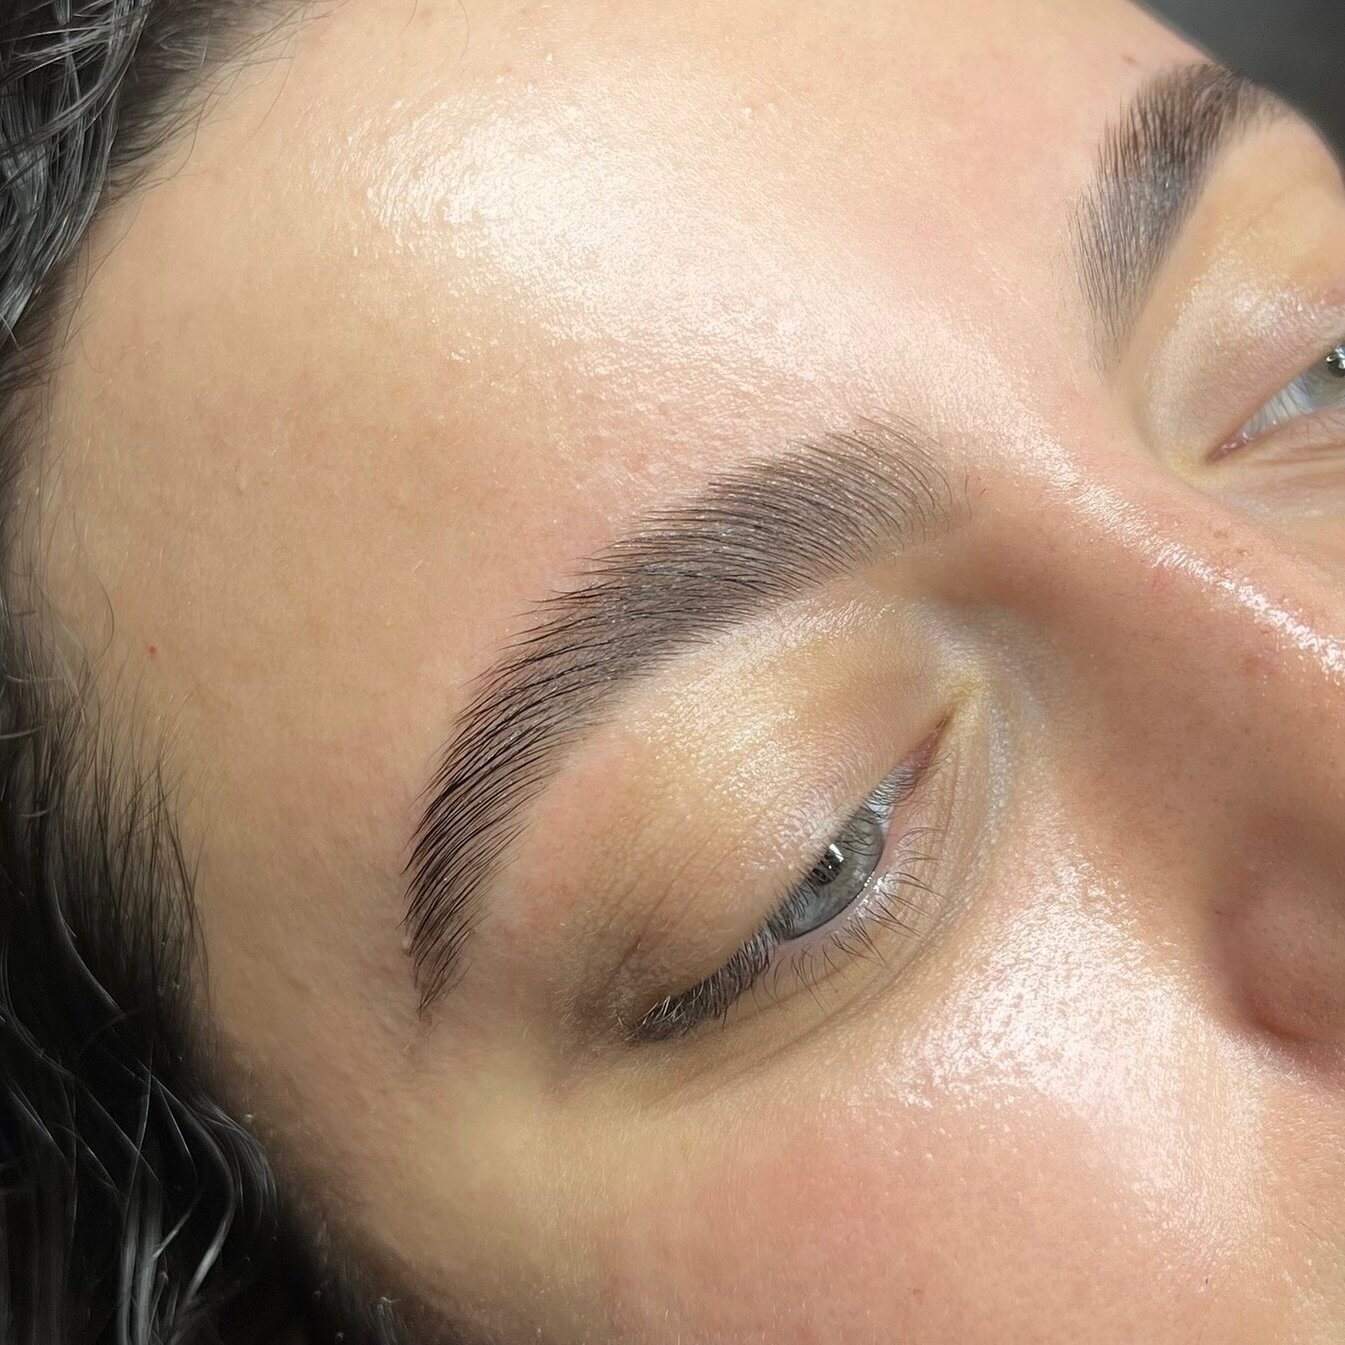 Brow tints could be as natural or as defined as you wish! Each service is completely tailored to what your personal needs + goals are ✨

Currently booking appointments for next month! Booking link found in bio 🗓️